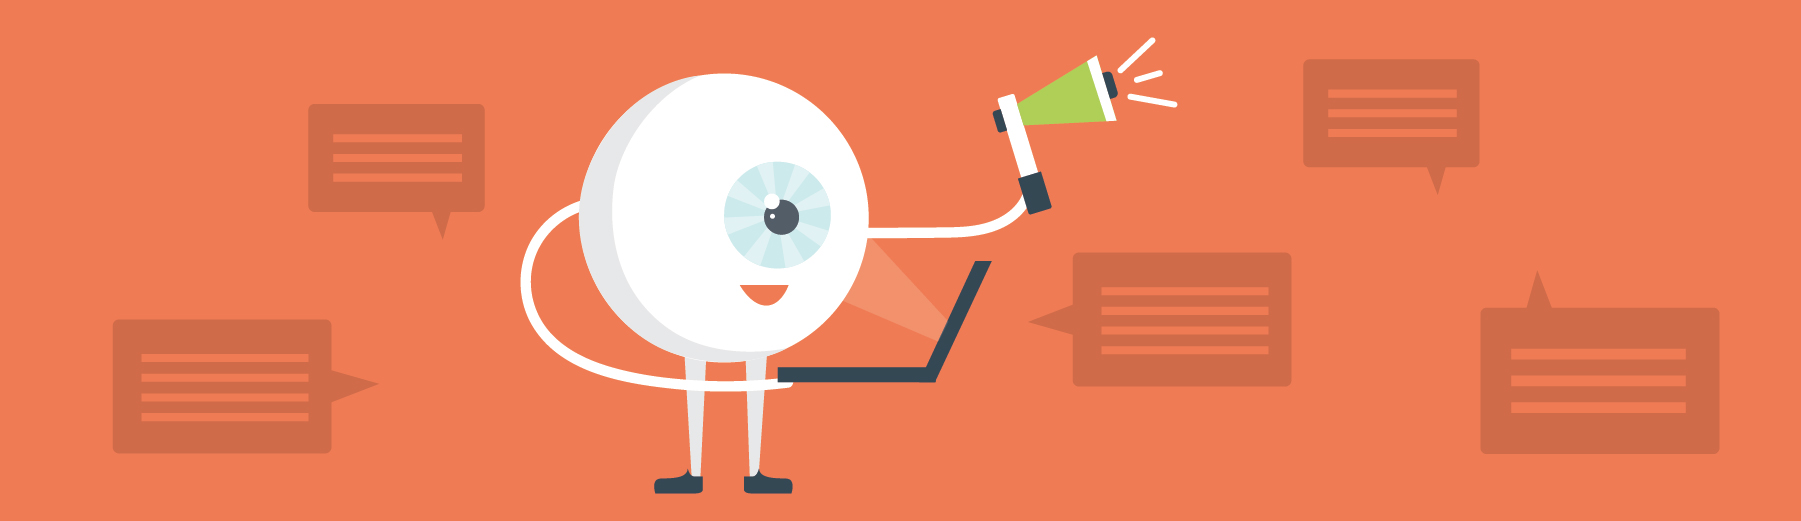 Successful content marketing is powered by visual marketing.